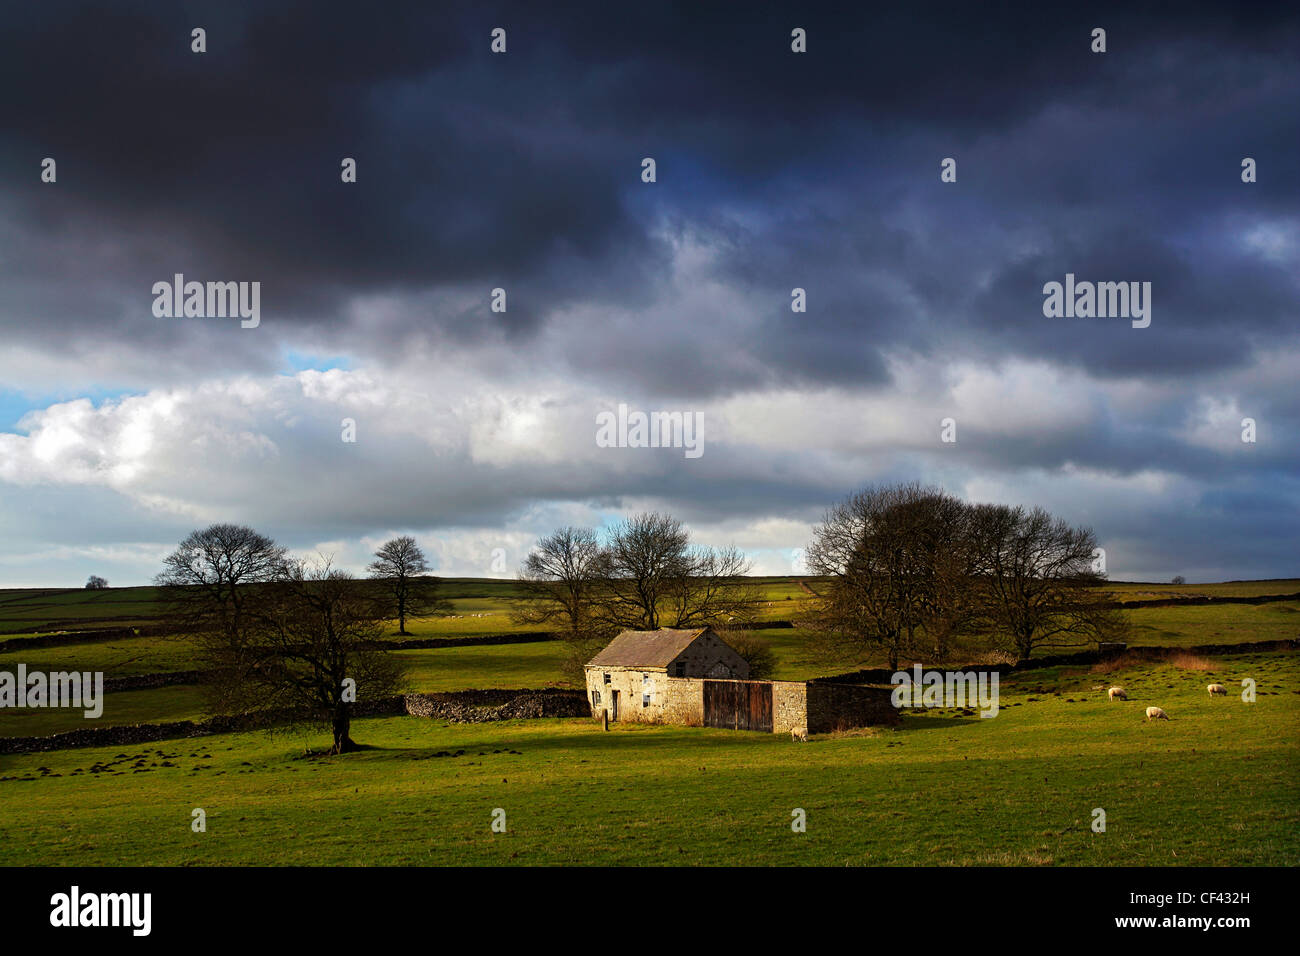 Sheep grazing by a remote farmhouse, now used as a barn, close to the small village of Flagg in the western Peak District. Stock Photo